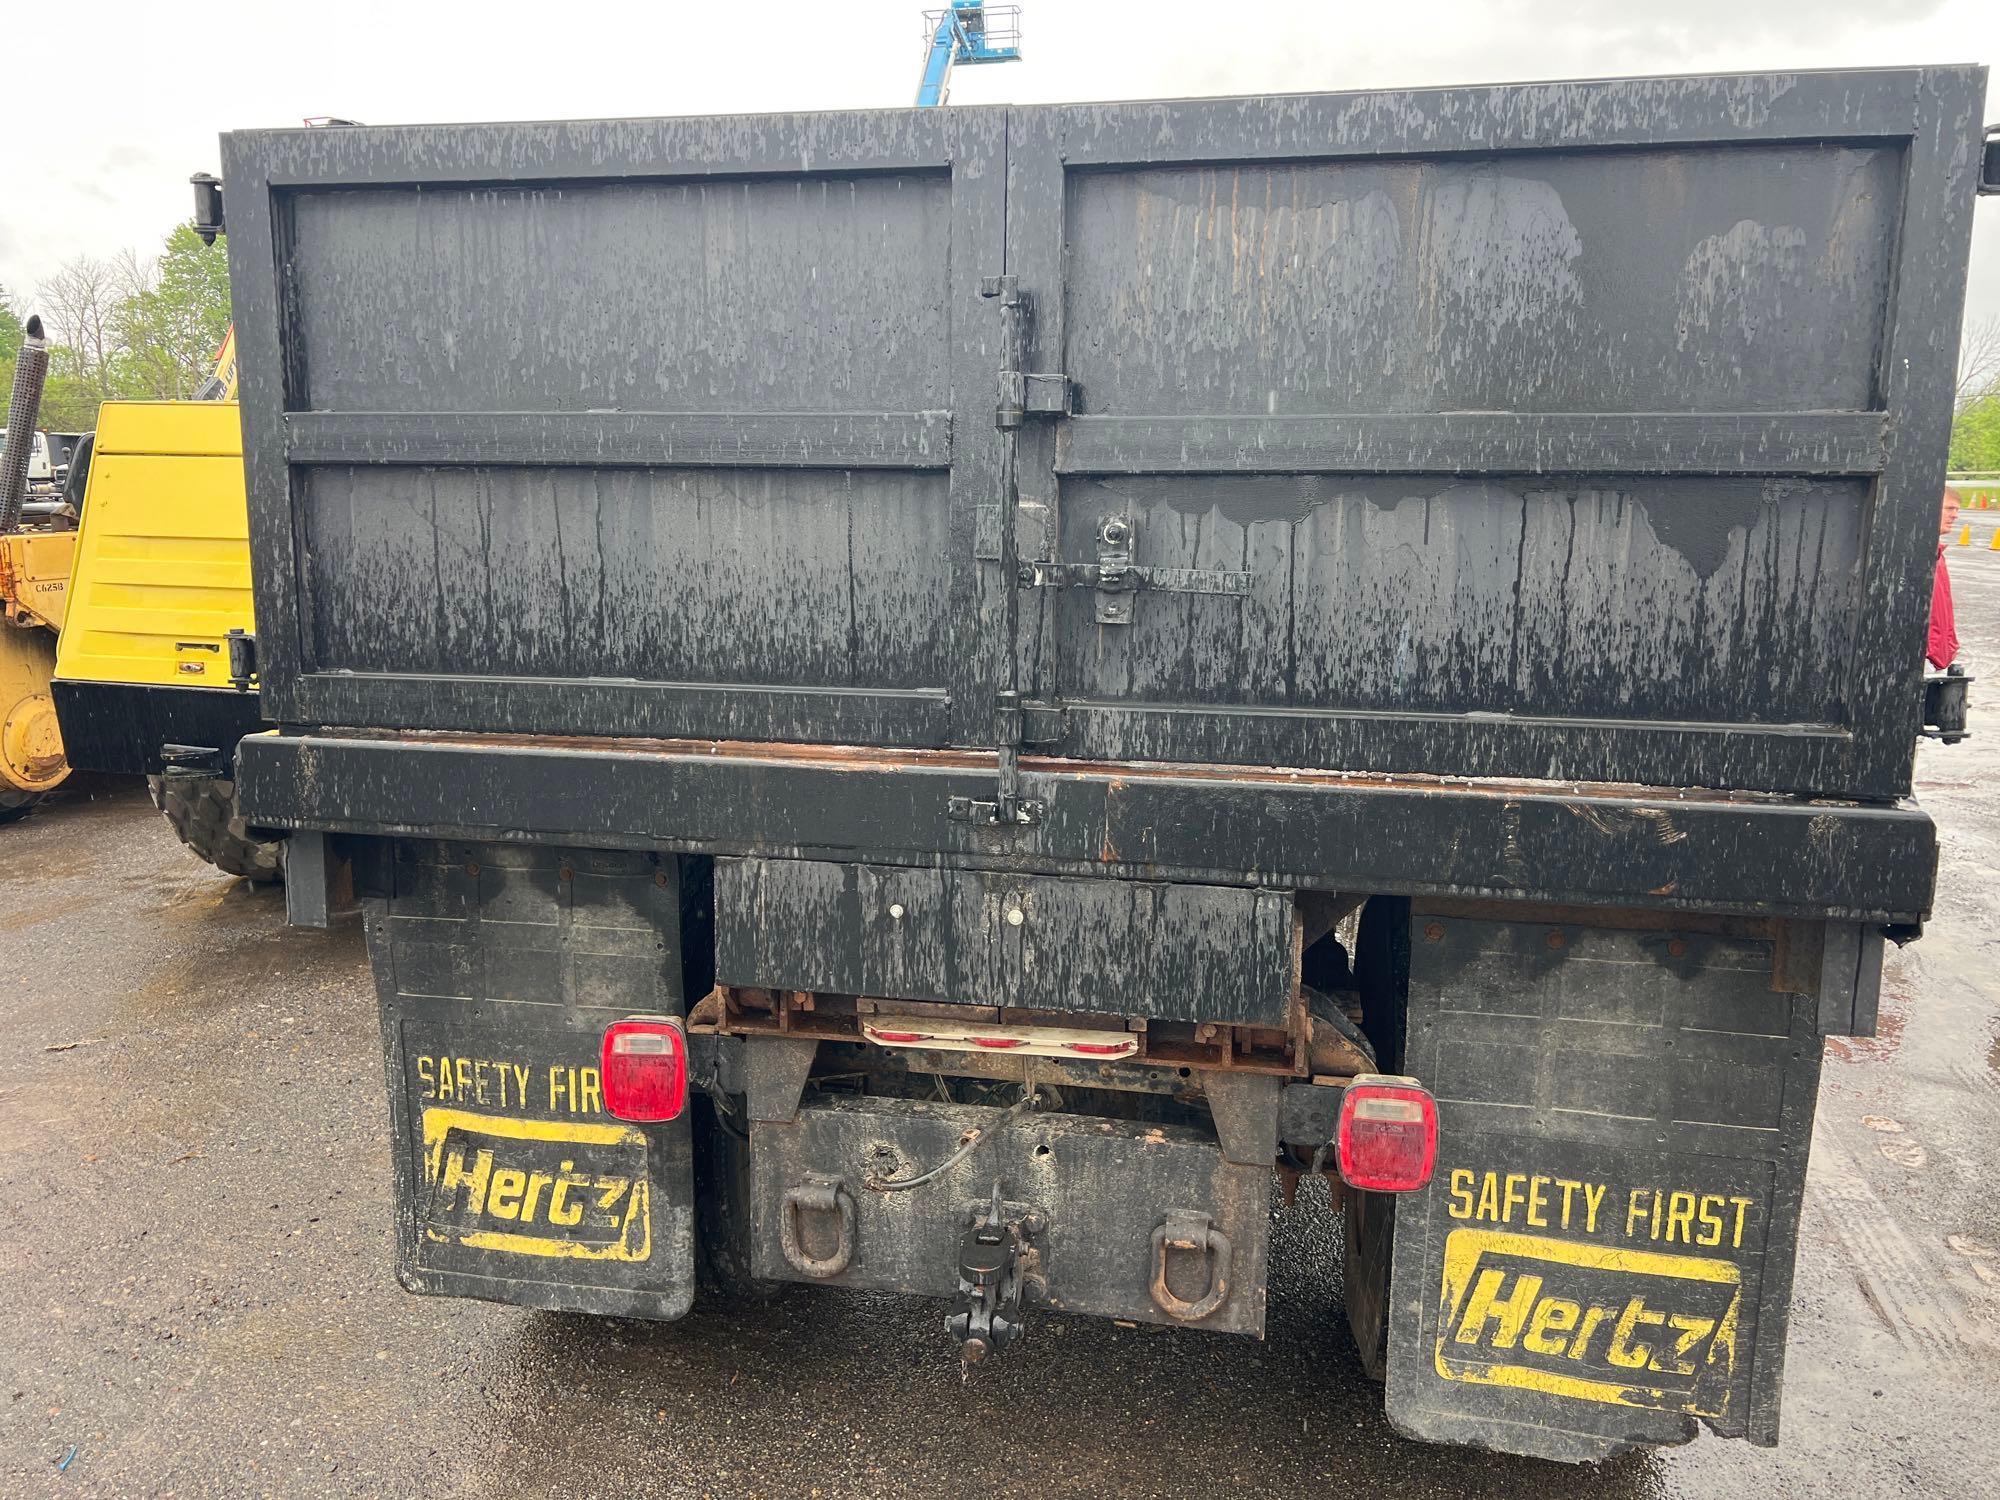 1998 GMC STAKE DUMP TRUCK VN:515418 powered by diesel engine, equipped with power steering, stake